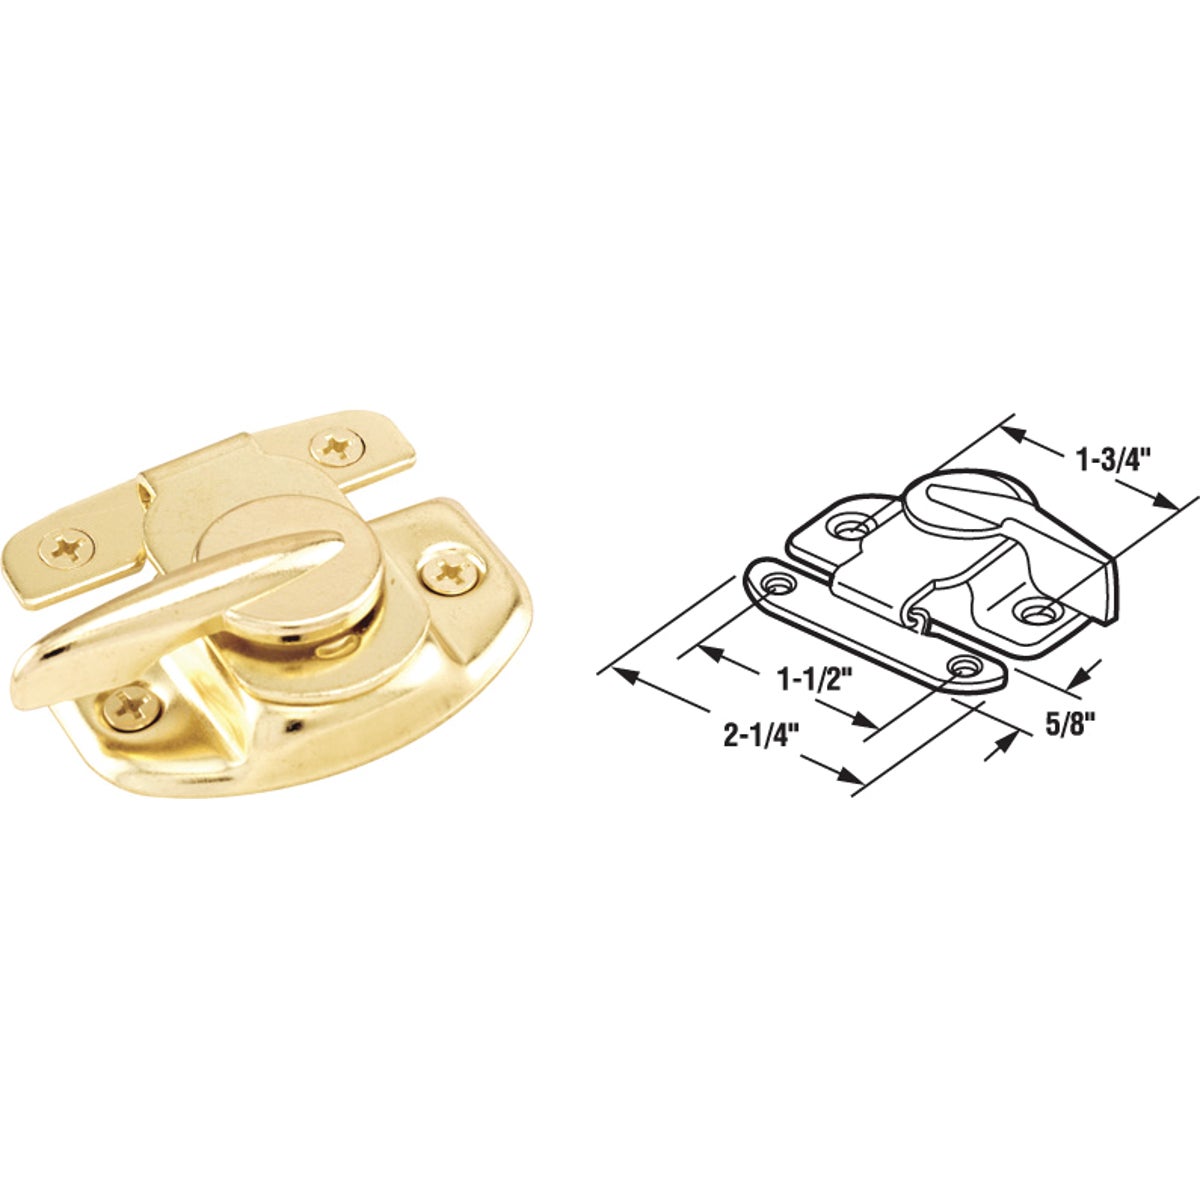 Item 247332, Safety sash lock for double hung windows.